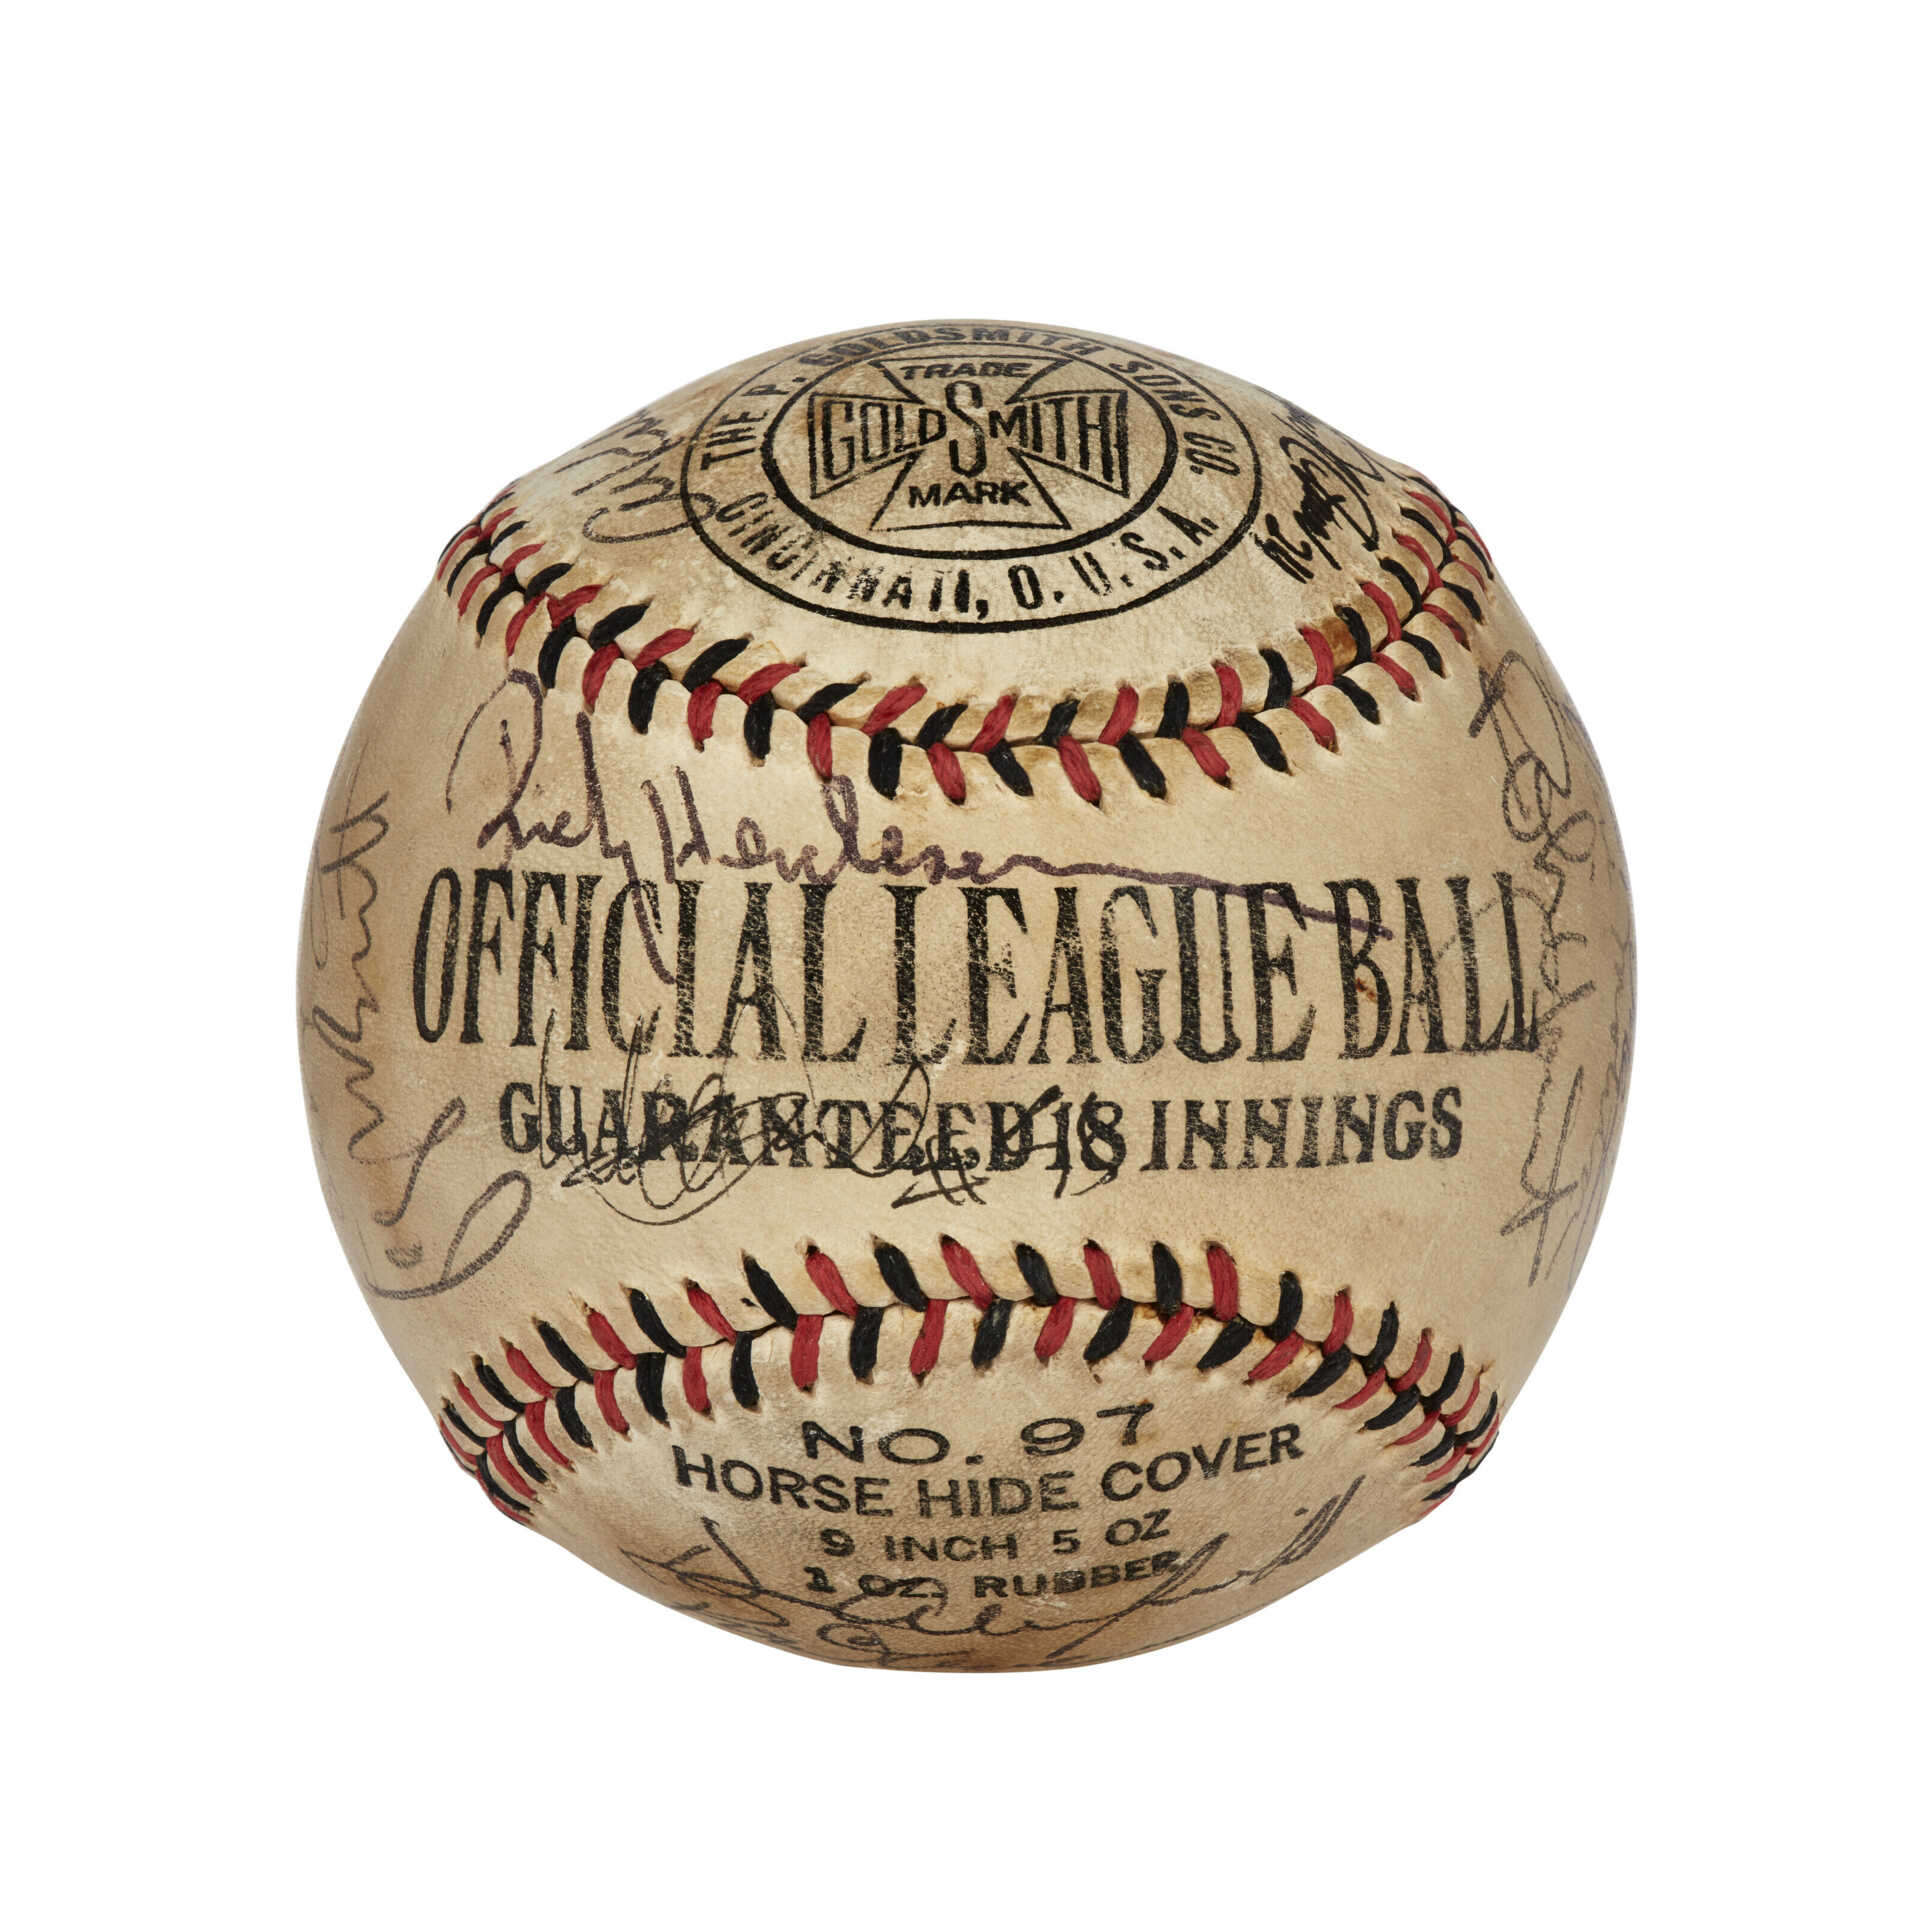 UNIQUE AND HISTORICALLY SIGNIFICANT 3,000 HIT MEMBER AUTOGRAPHED BASEBALL: A MONUMENTAL COLLECTING ACHIEVEMENT (PSA/DNA)